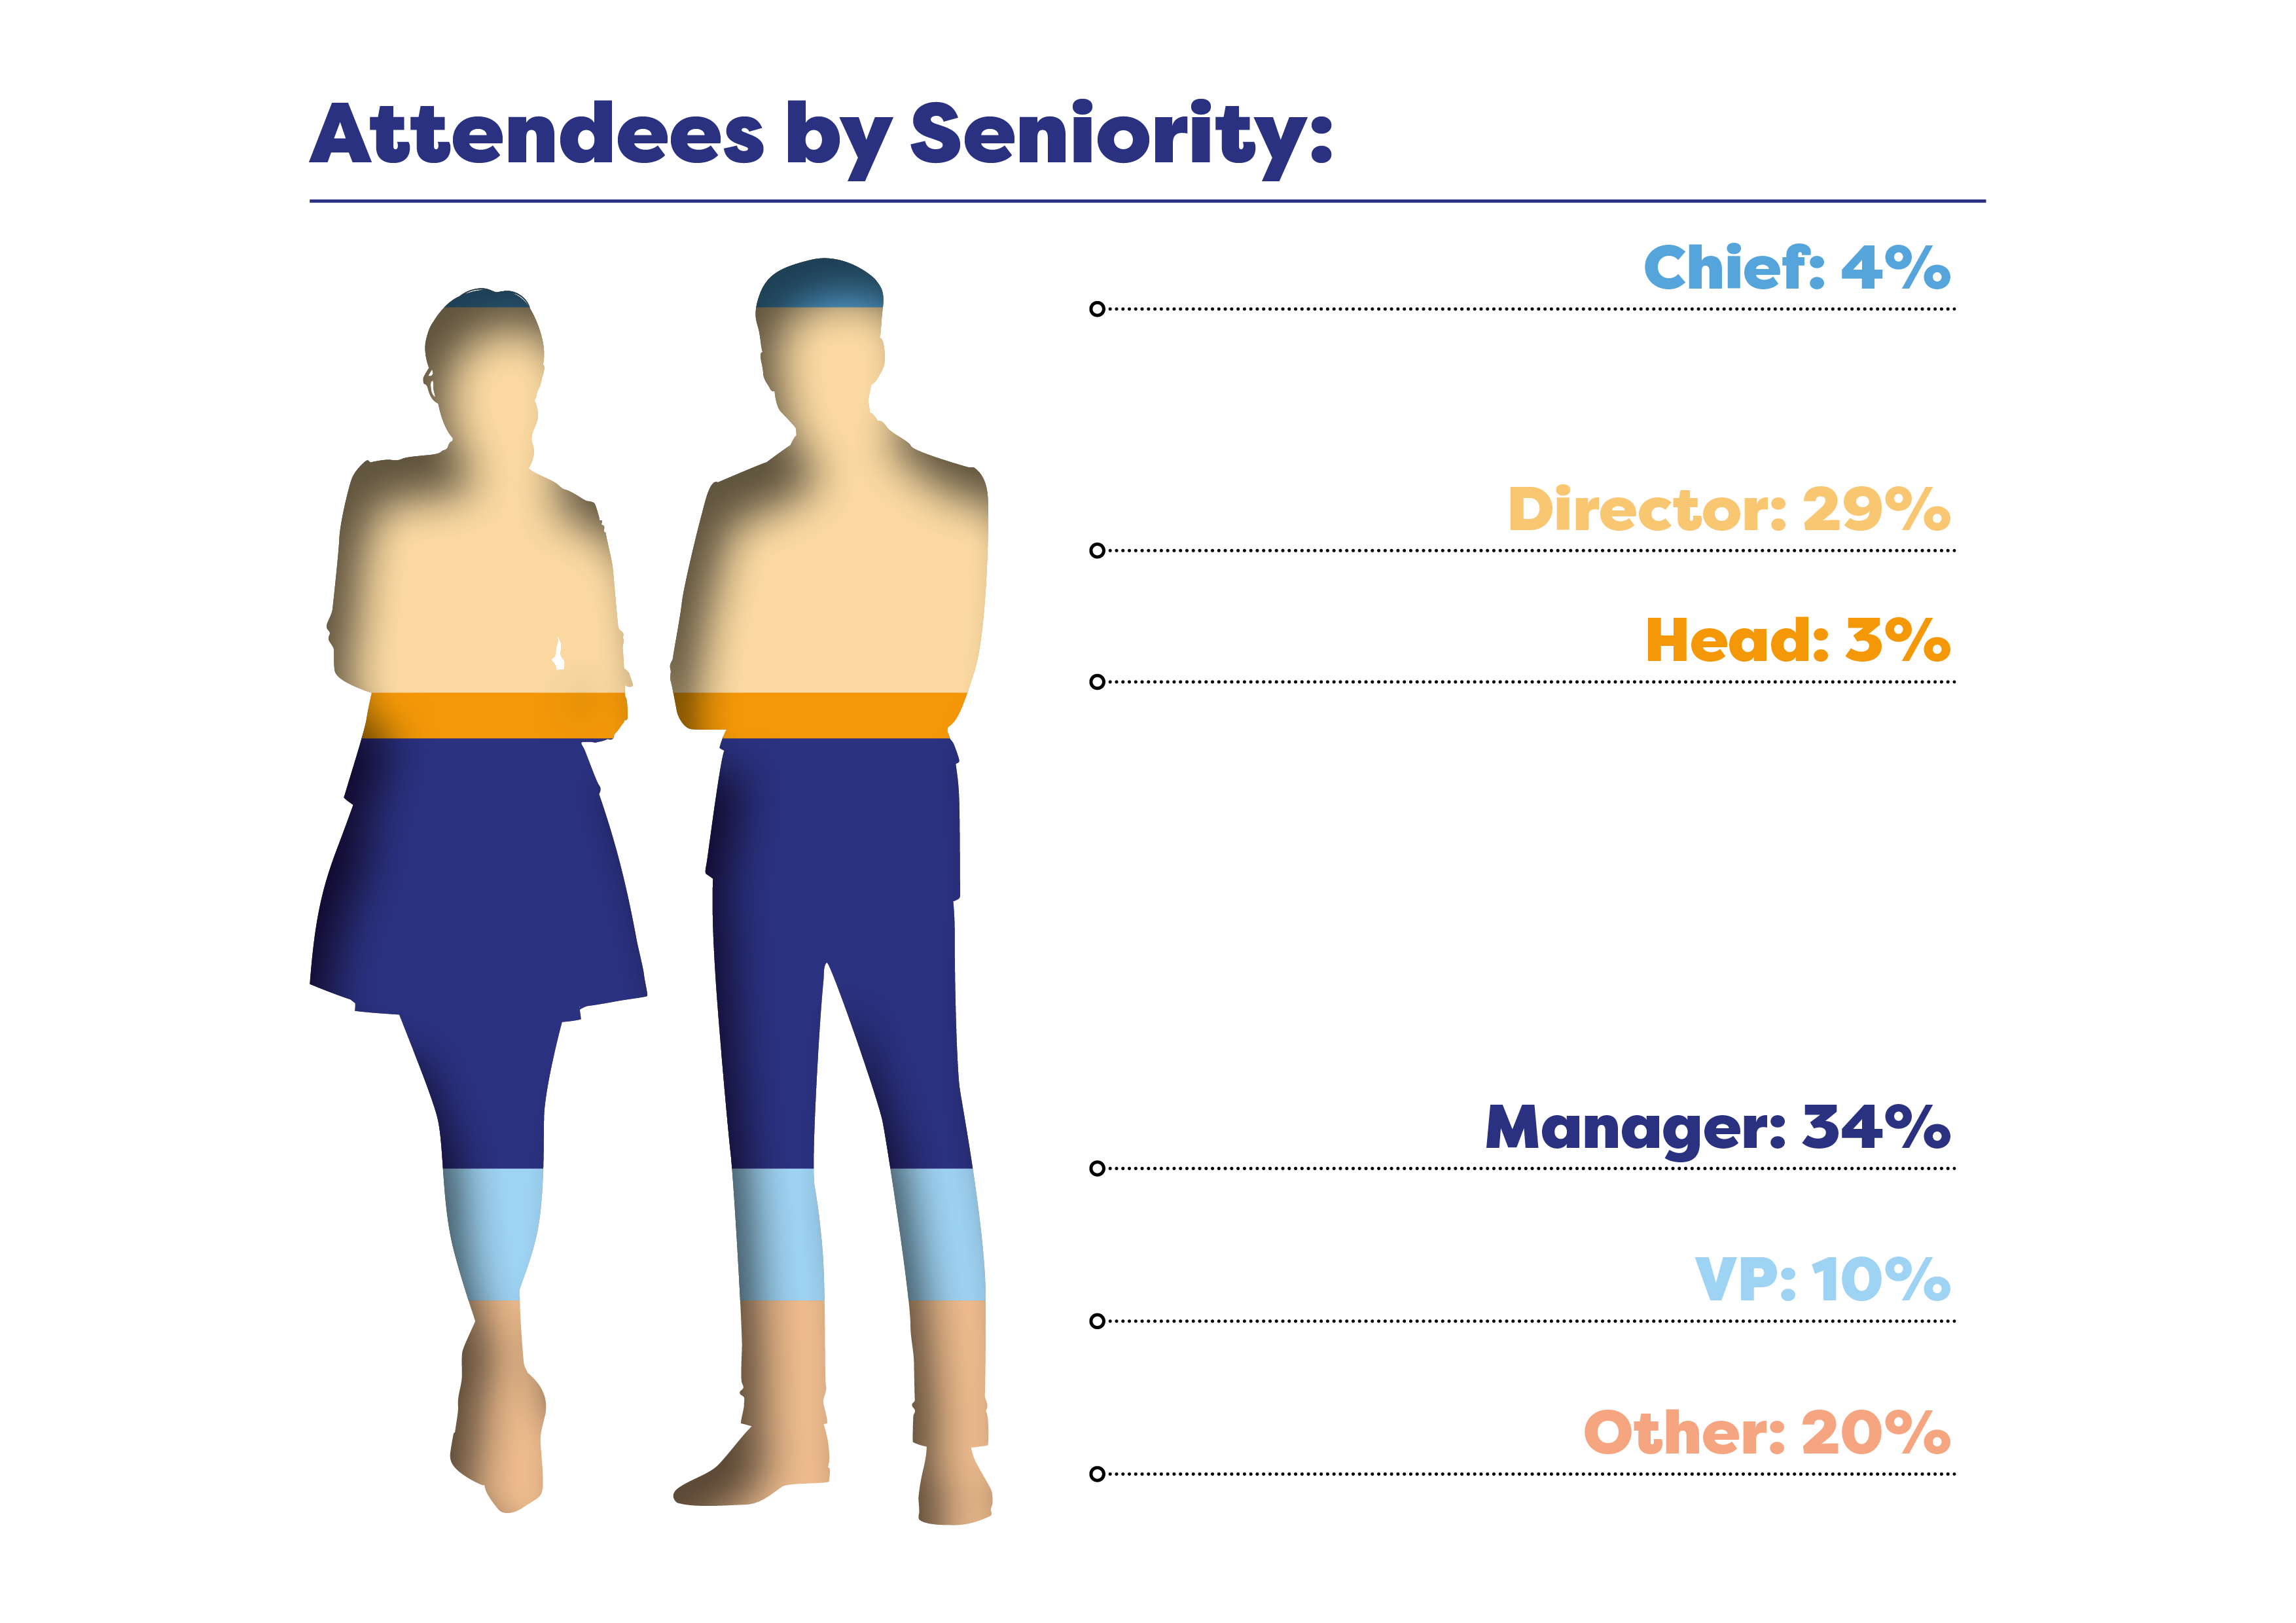 Attendees by Seniority